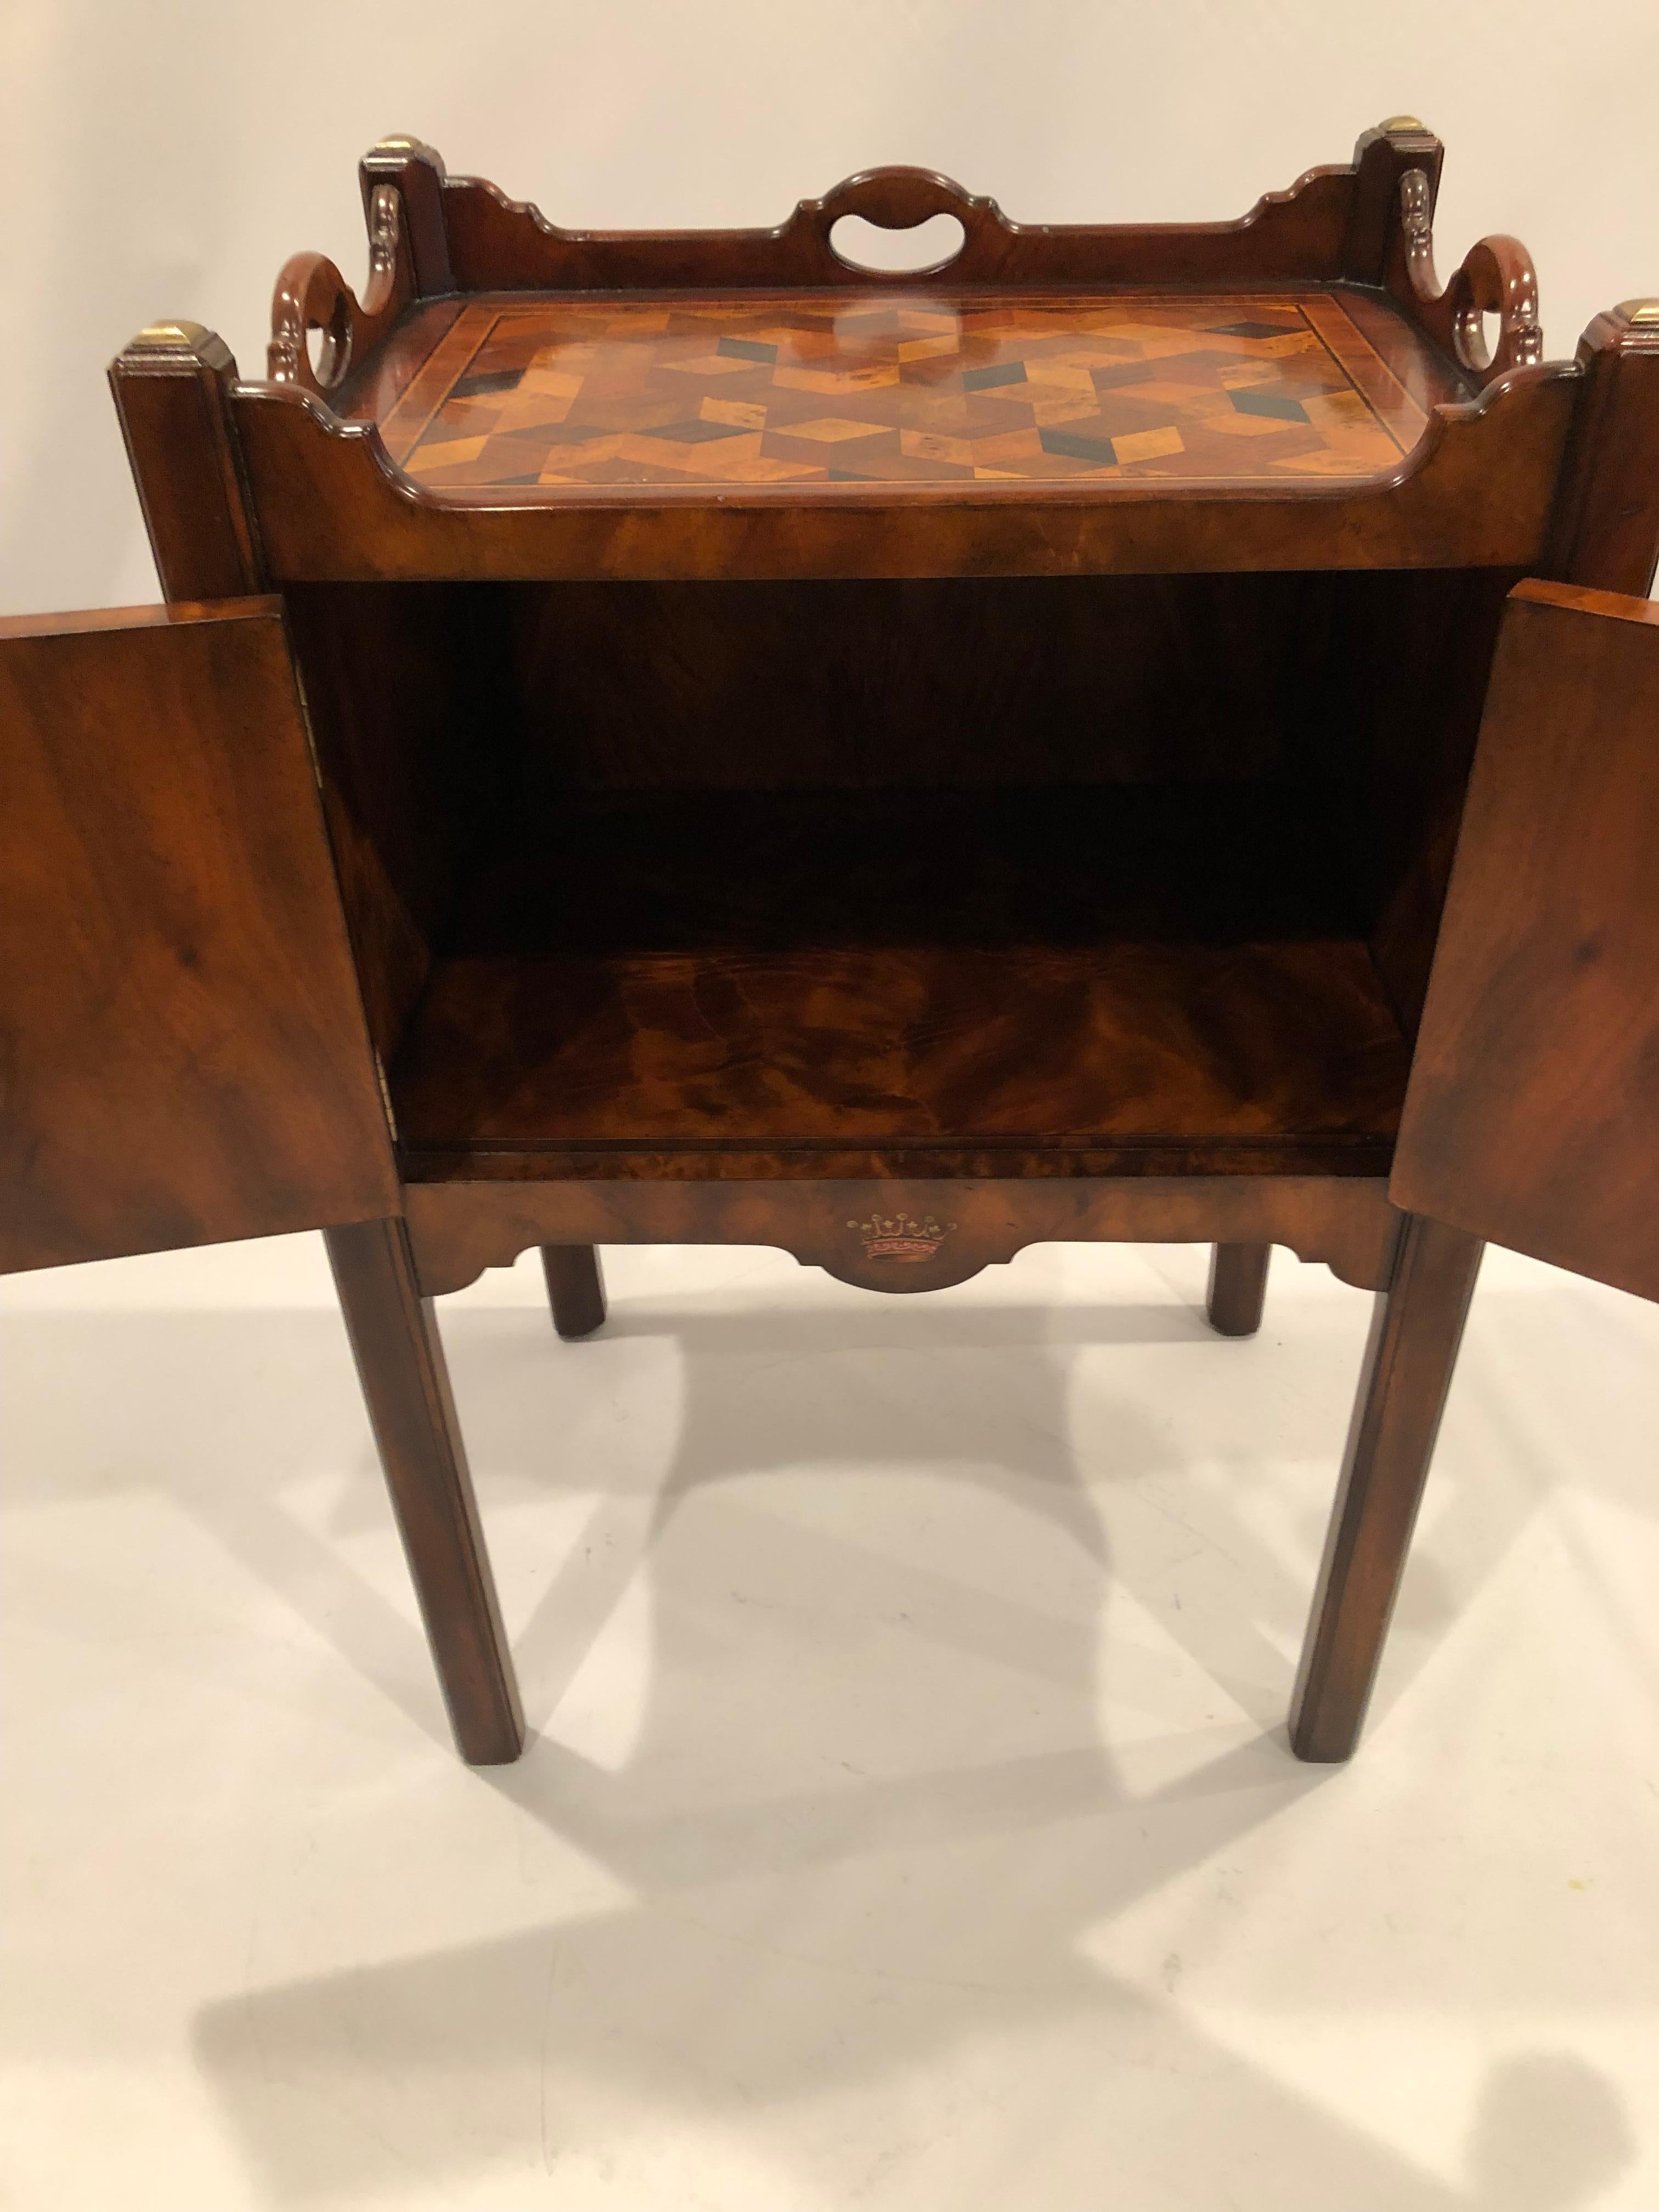 Vietnamese Gorgeous Theodore Alexander Althorp Mixed Wood Parquetry Cabinet Side Table